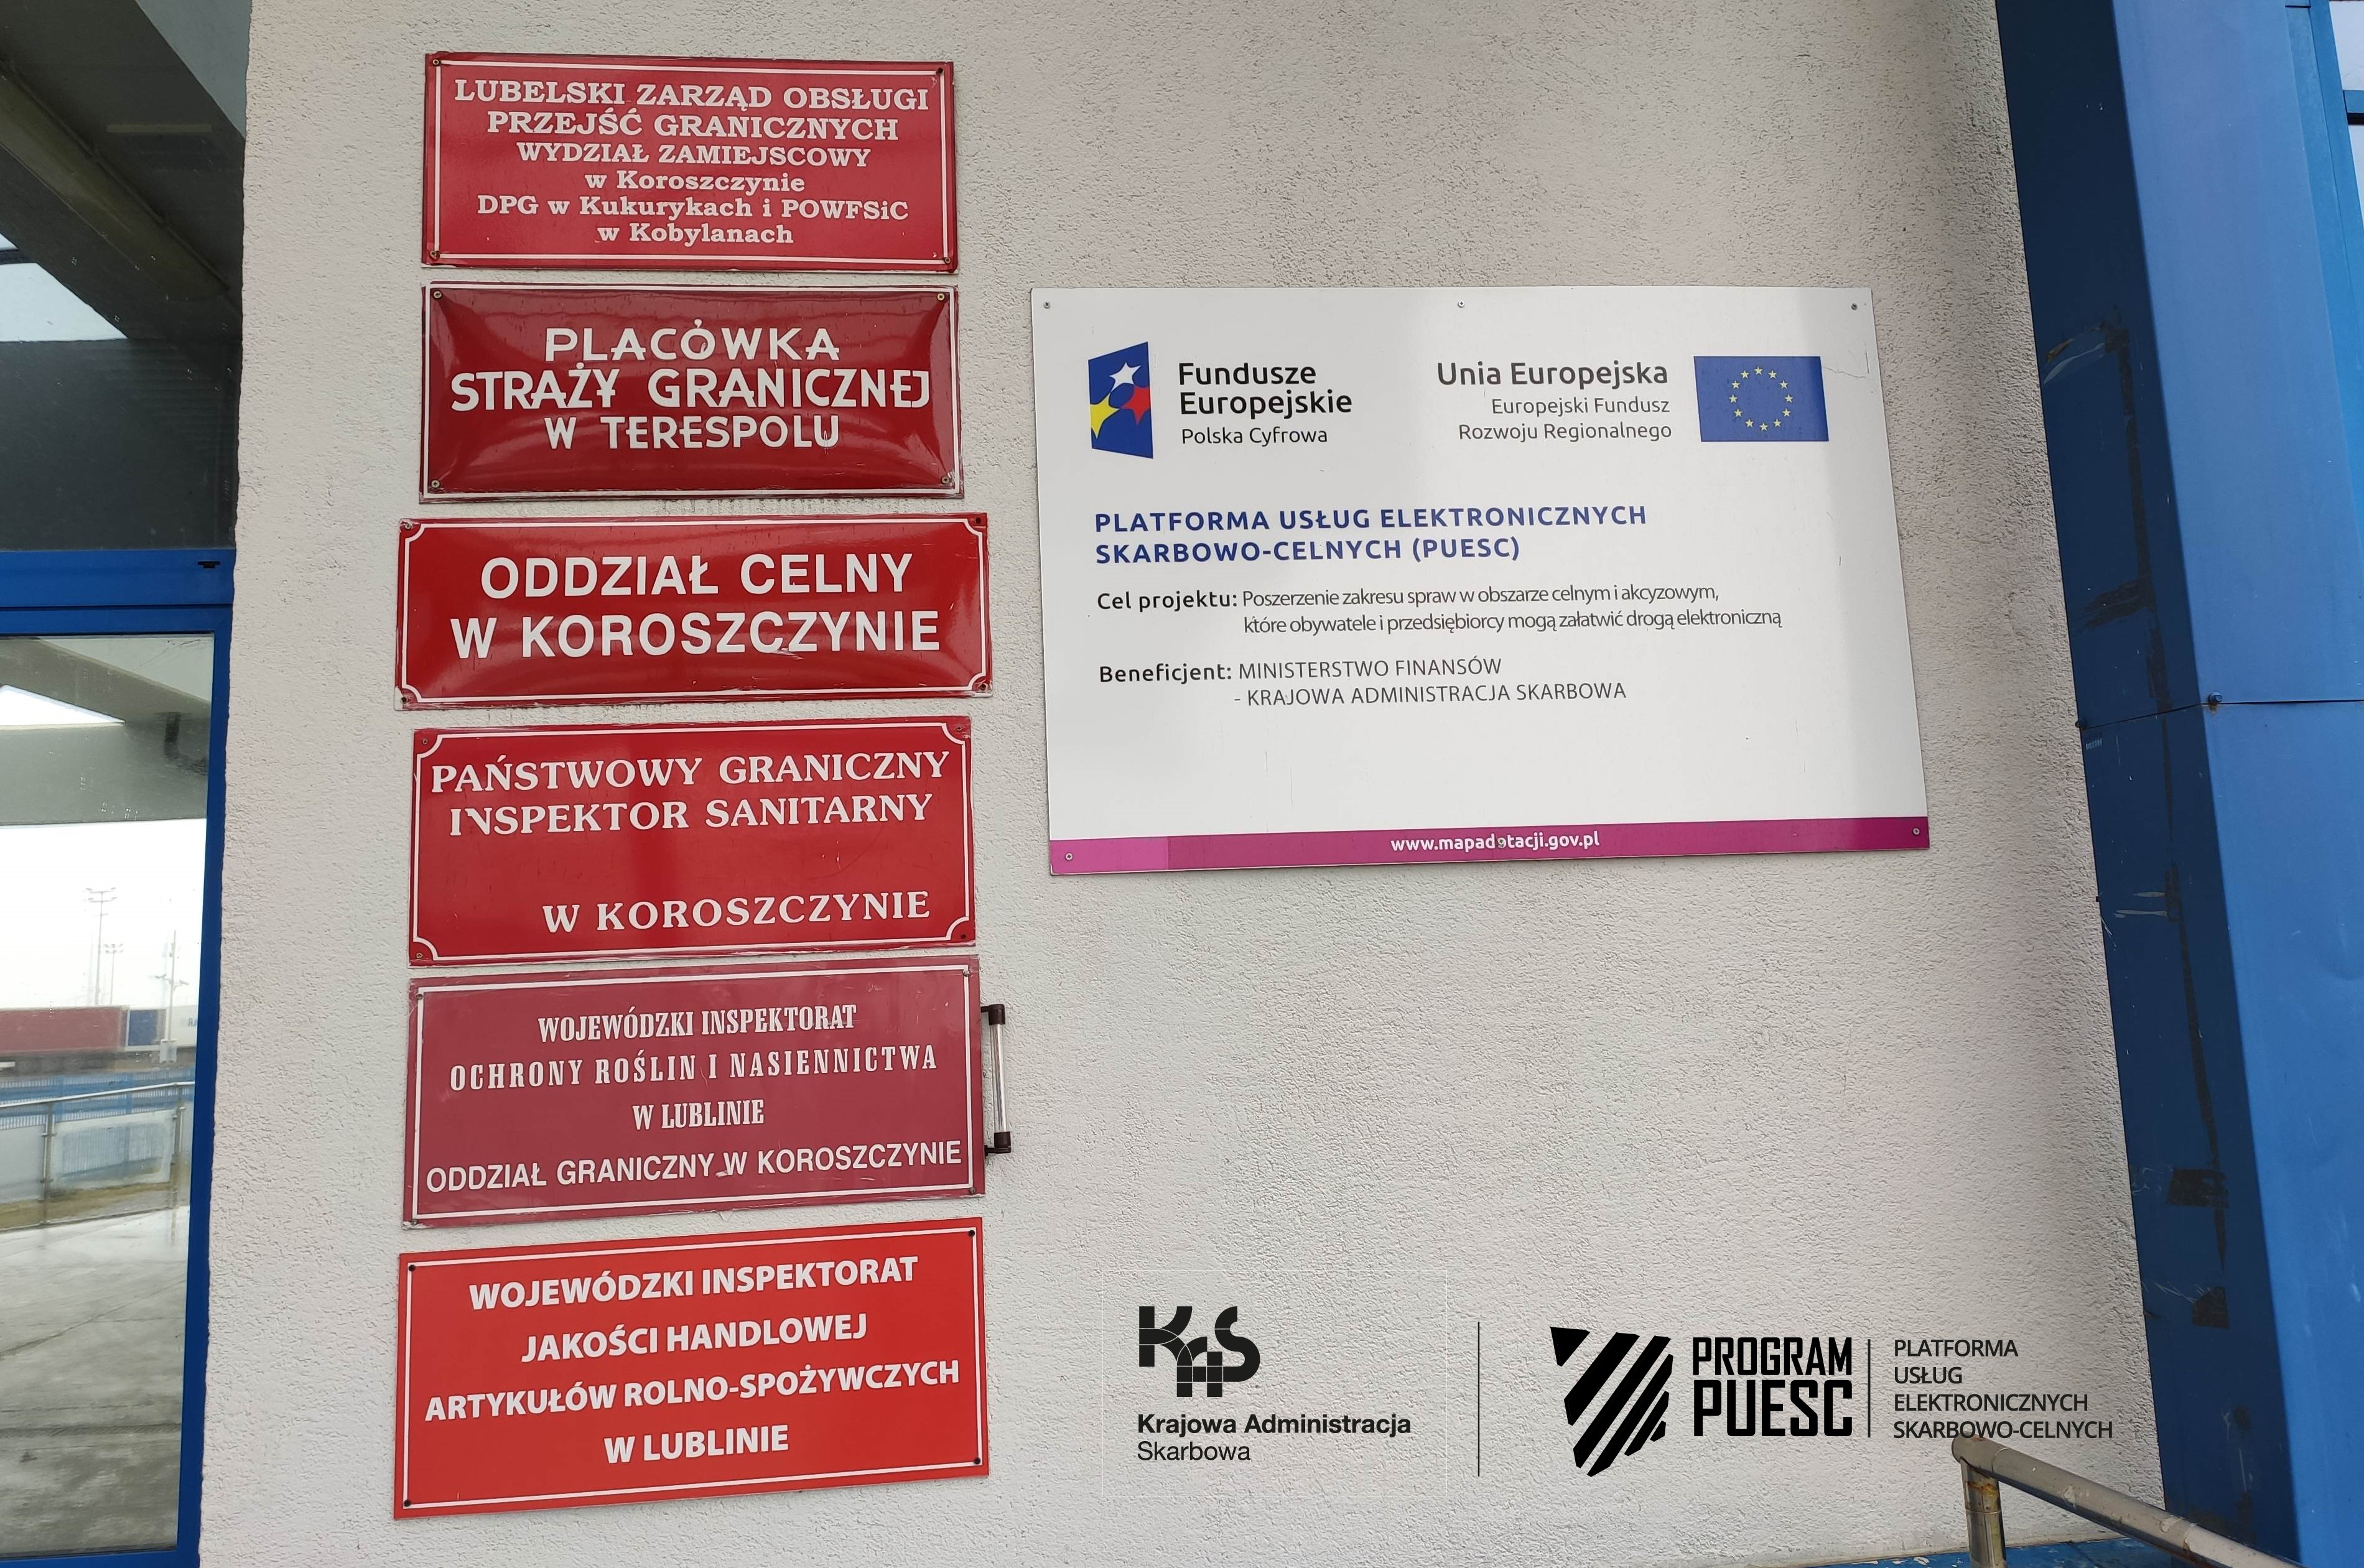 In the middle of the page you can see a wall with red signs informing about the institutions located in the building. On one of the boards there is information about the PUESC Project and logos: National Revenue Administration, European Funds Digital Poland, Tax and Customs Information System, Ministry of Finance, European Union European Regional Development Fund.